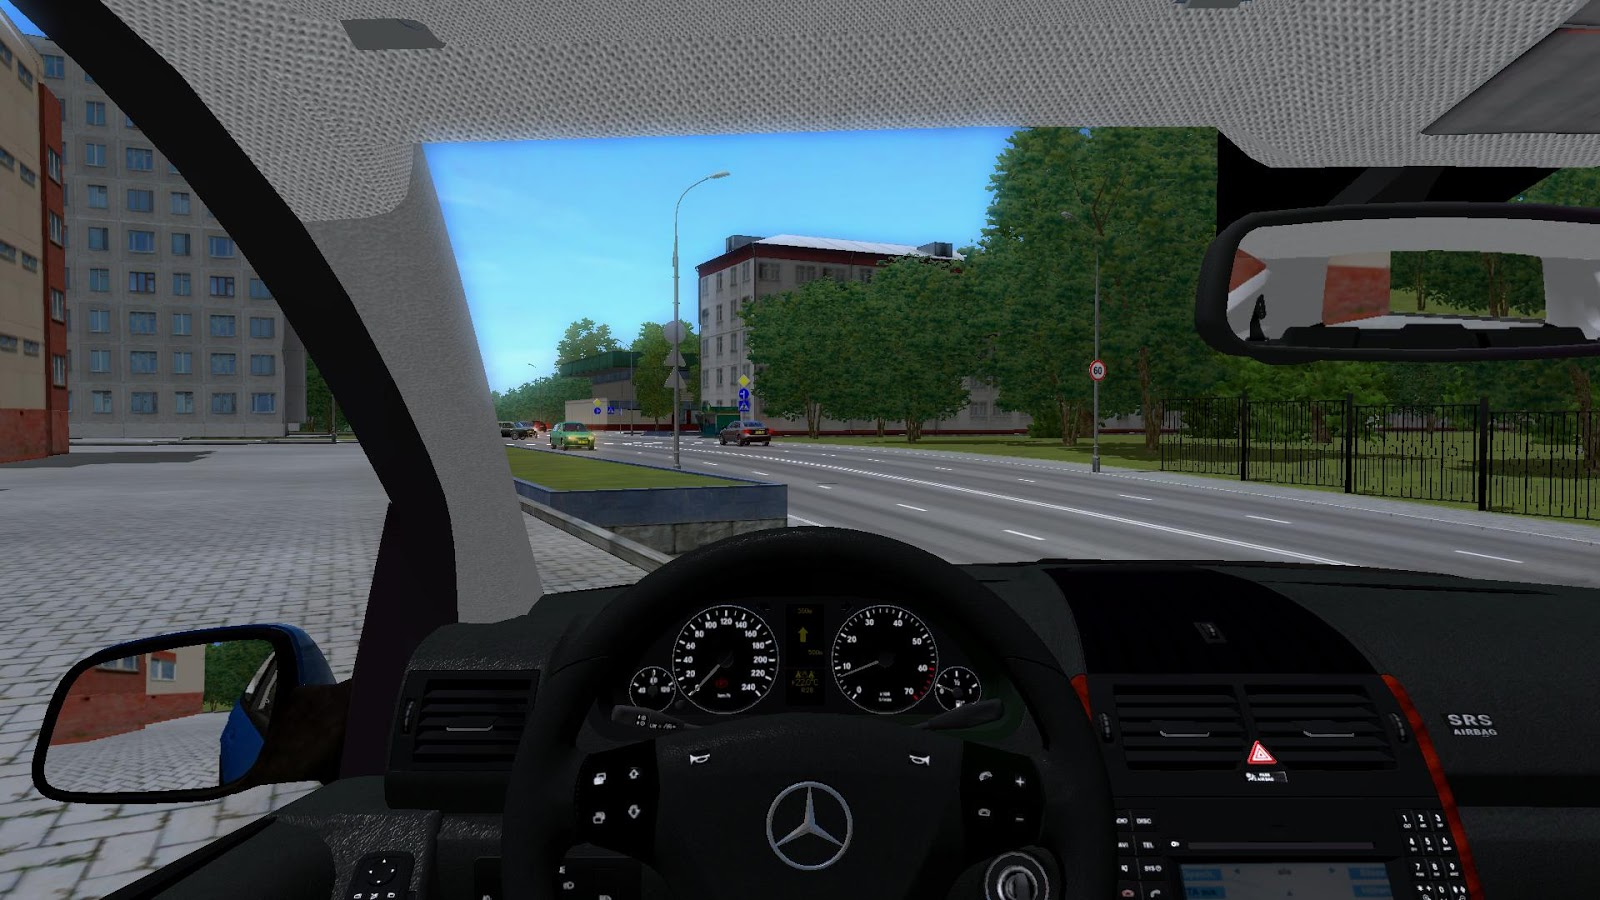 Сити кар драйвинг автобус. City car Driving Mercedes-Benz a200 Coupe. Mercedes a 200 City car Driving. Mercedes e200 Coupe City car Driving Simulator. City car Driving Simulator 2.